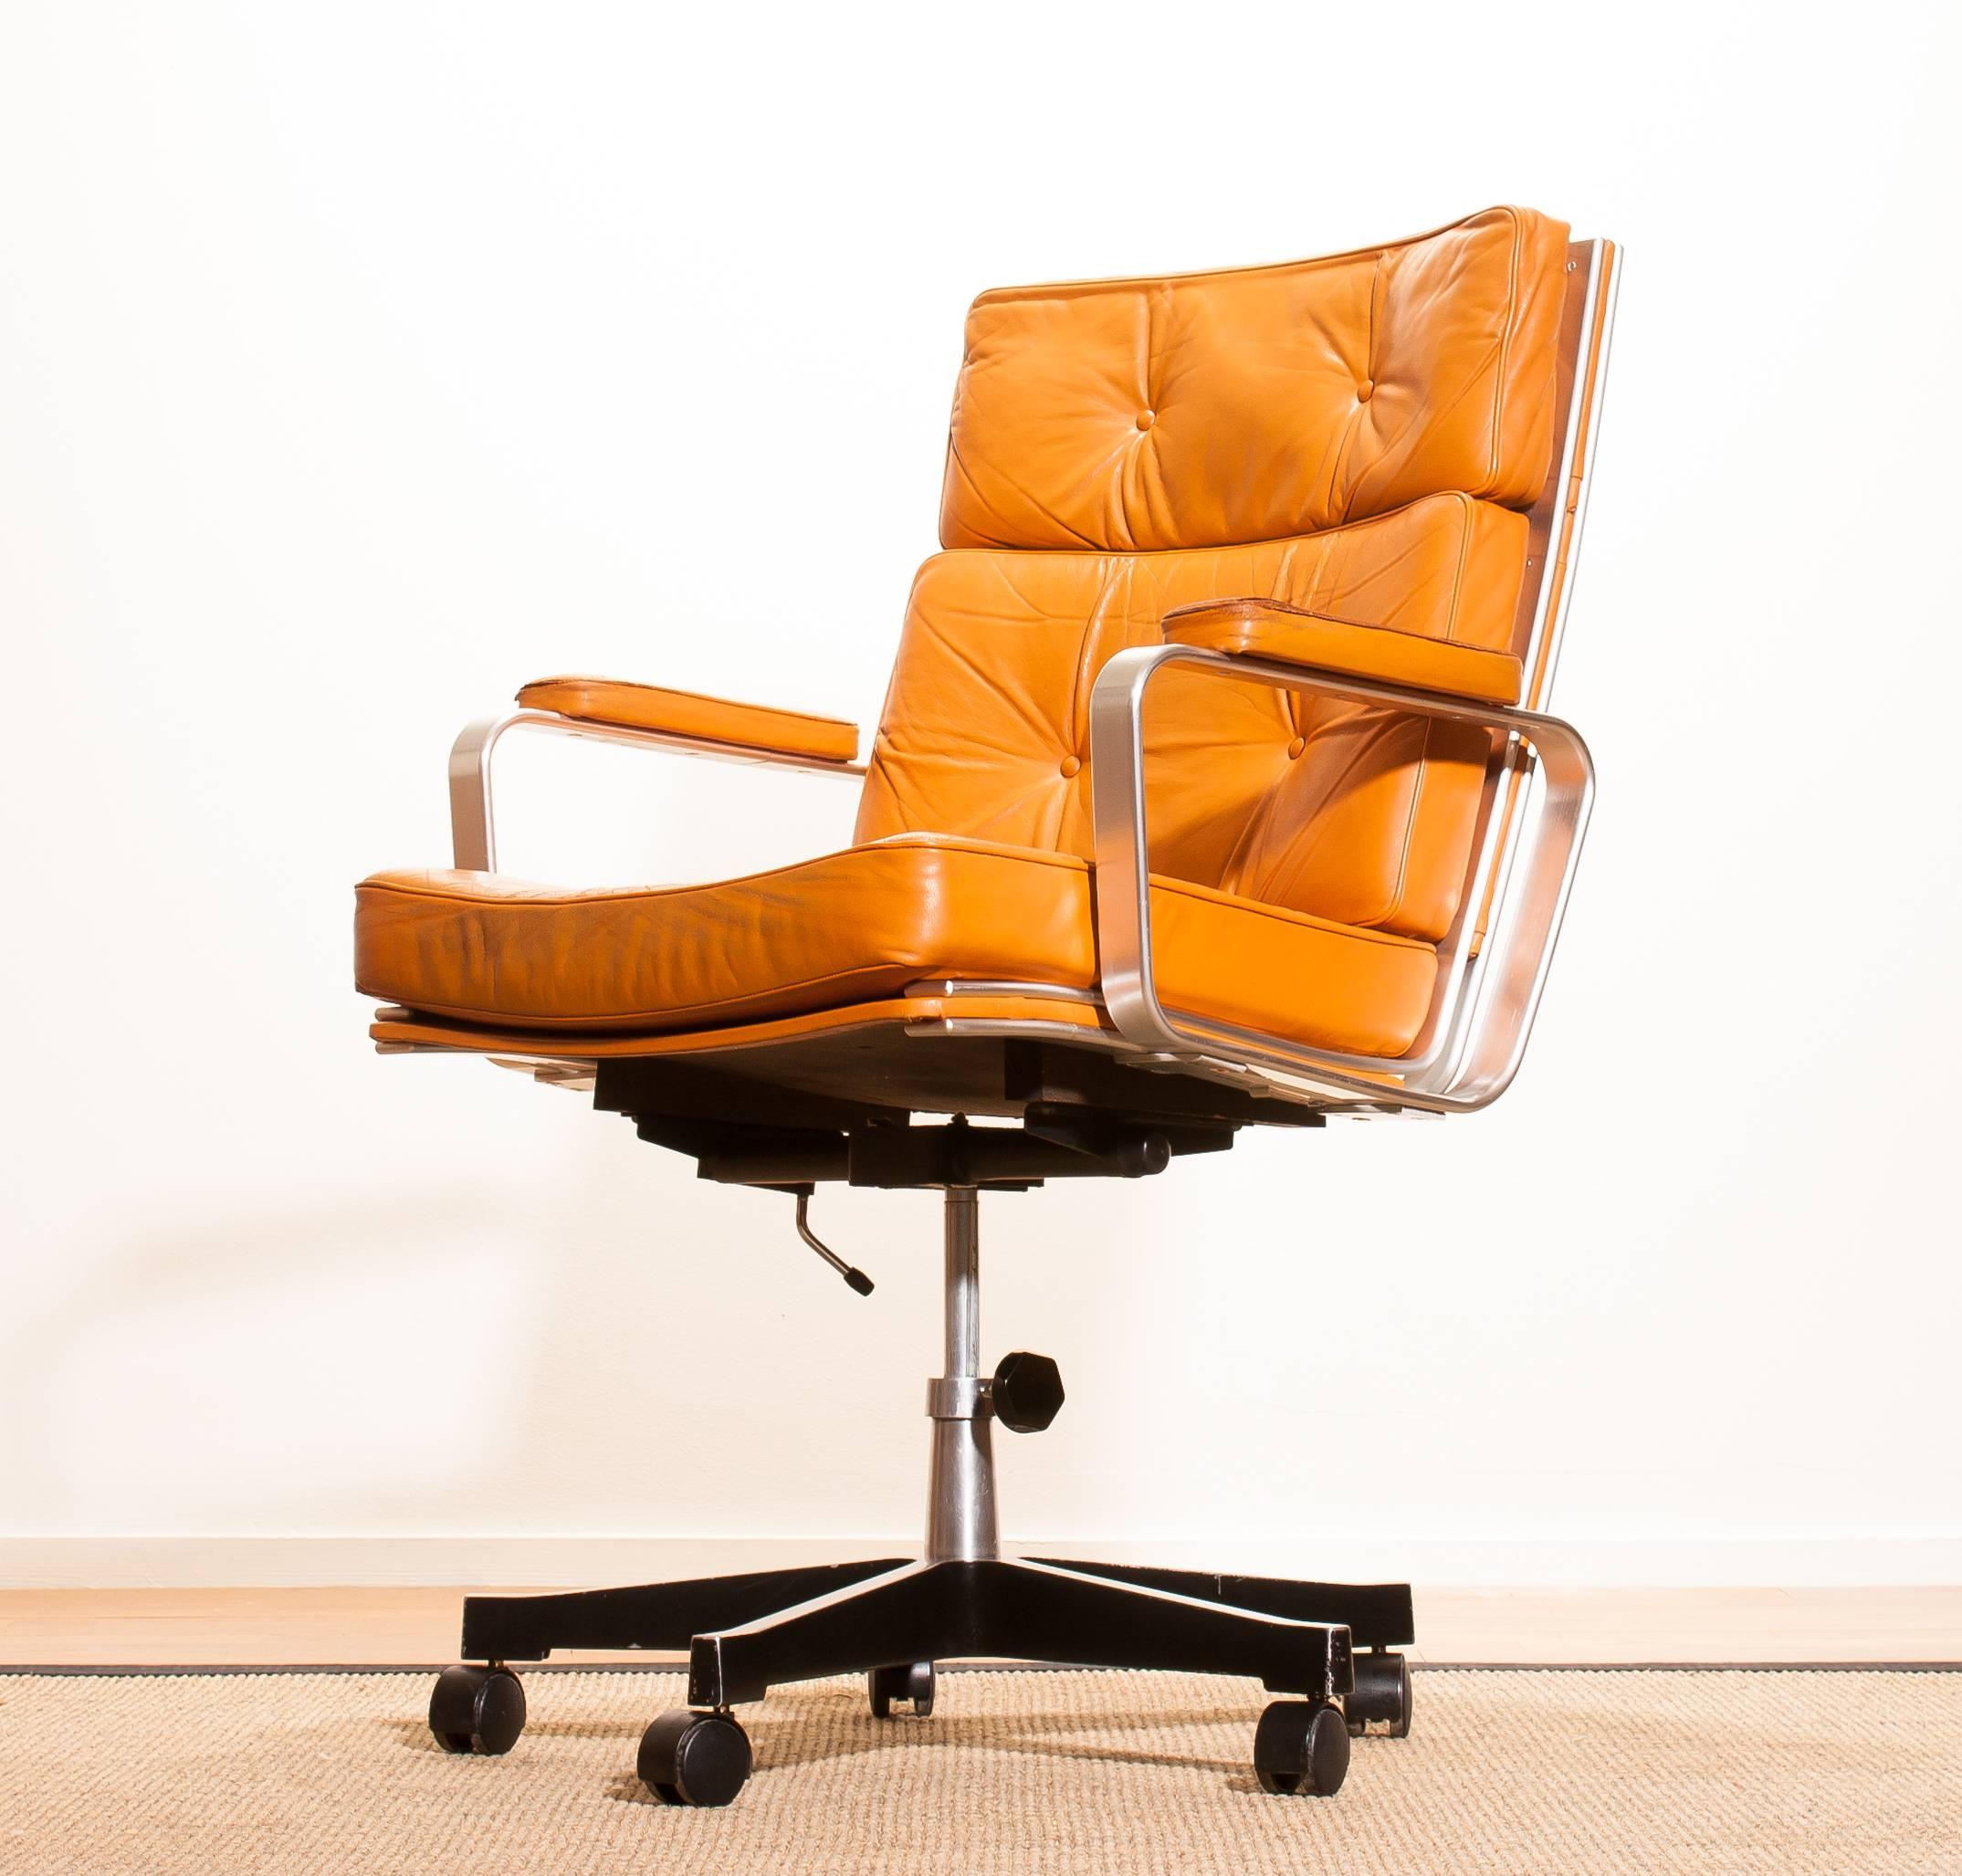 70s style office chair